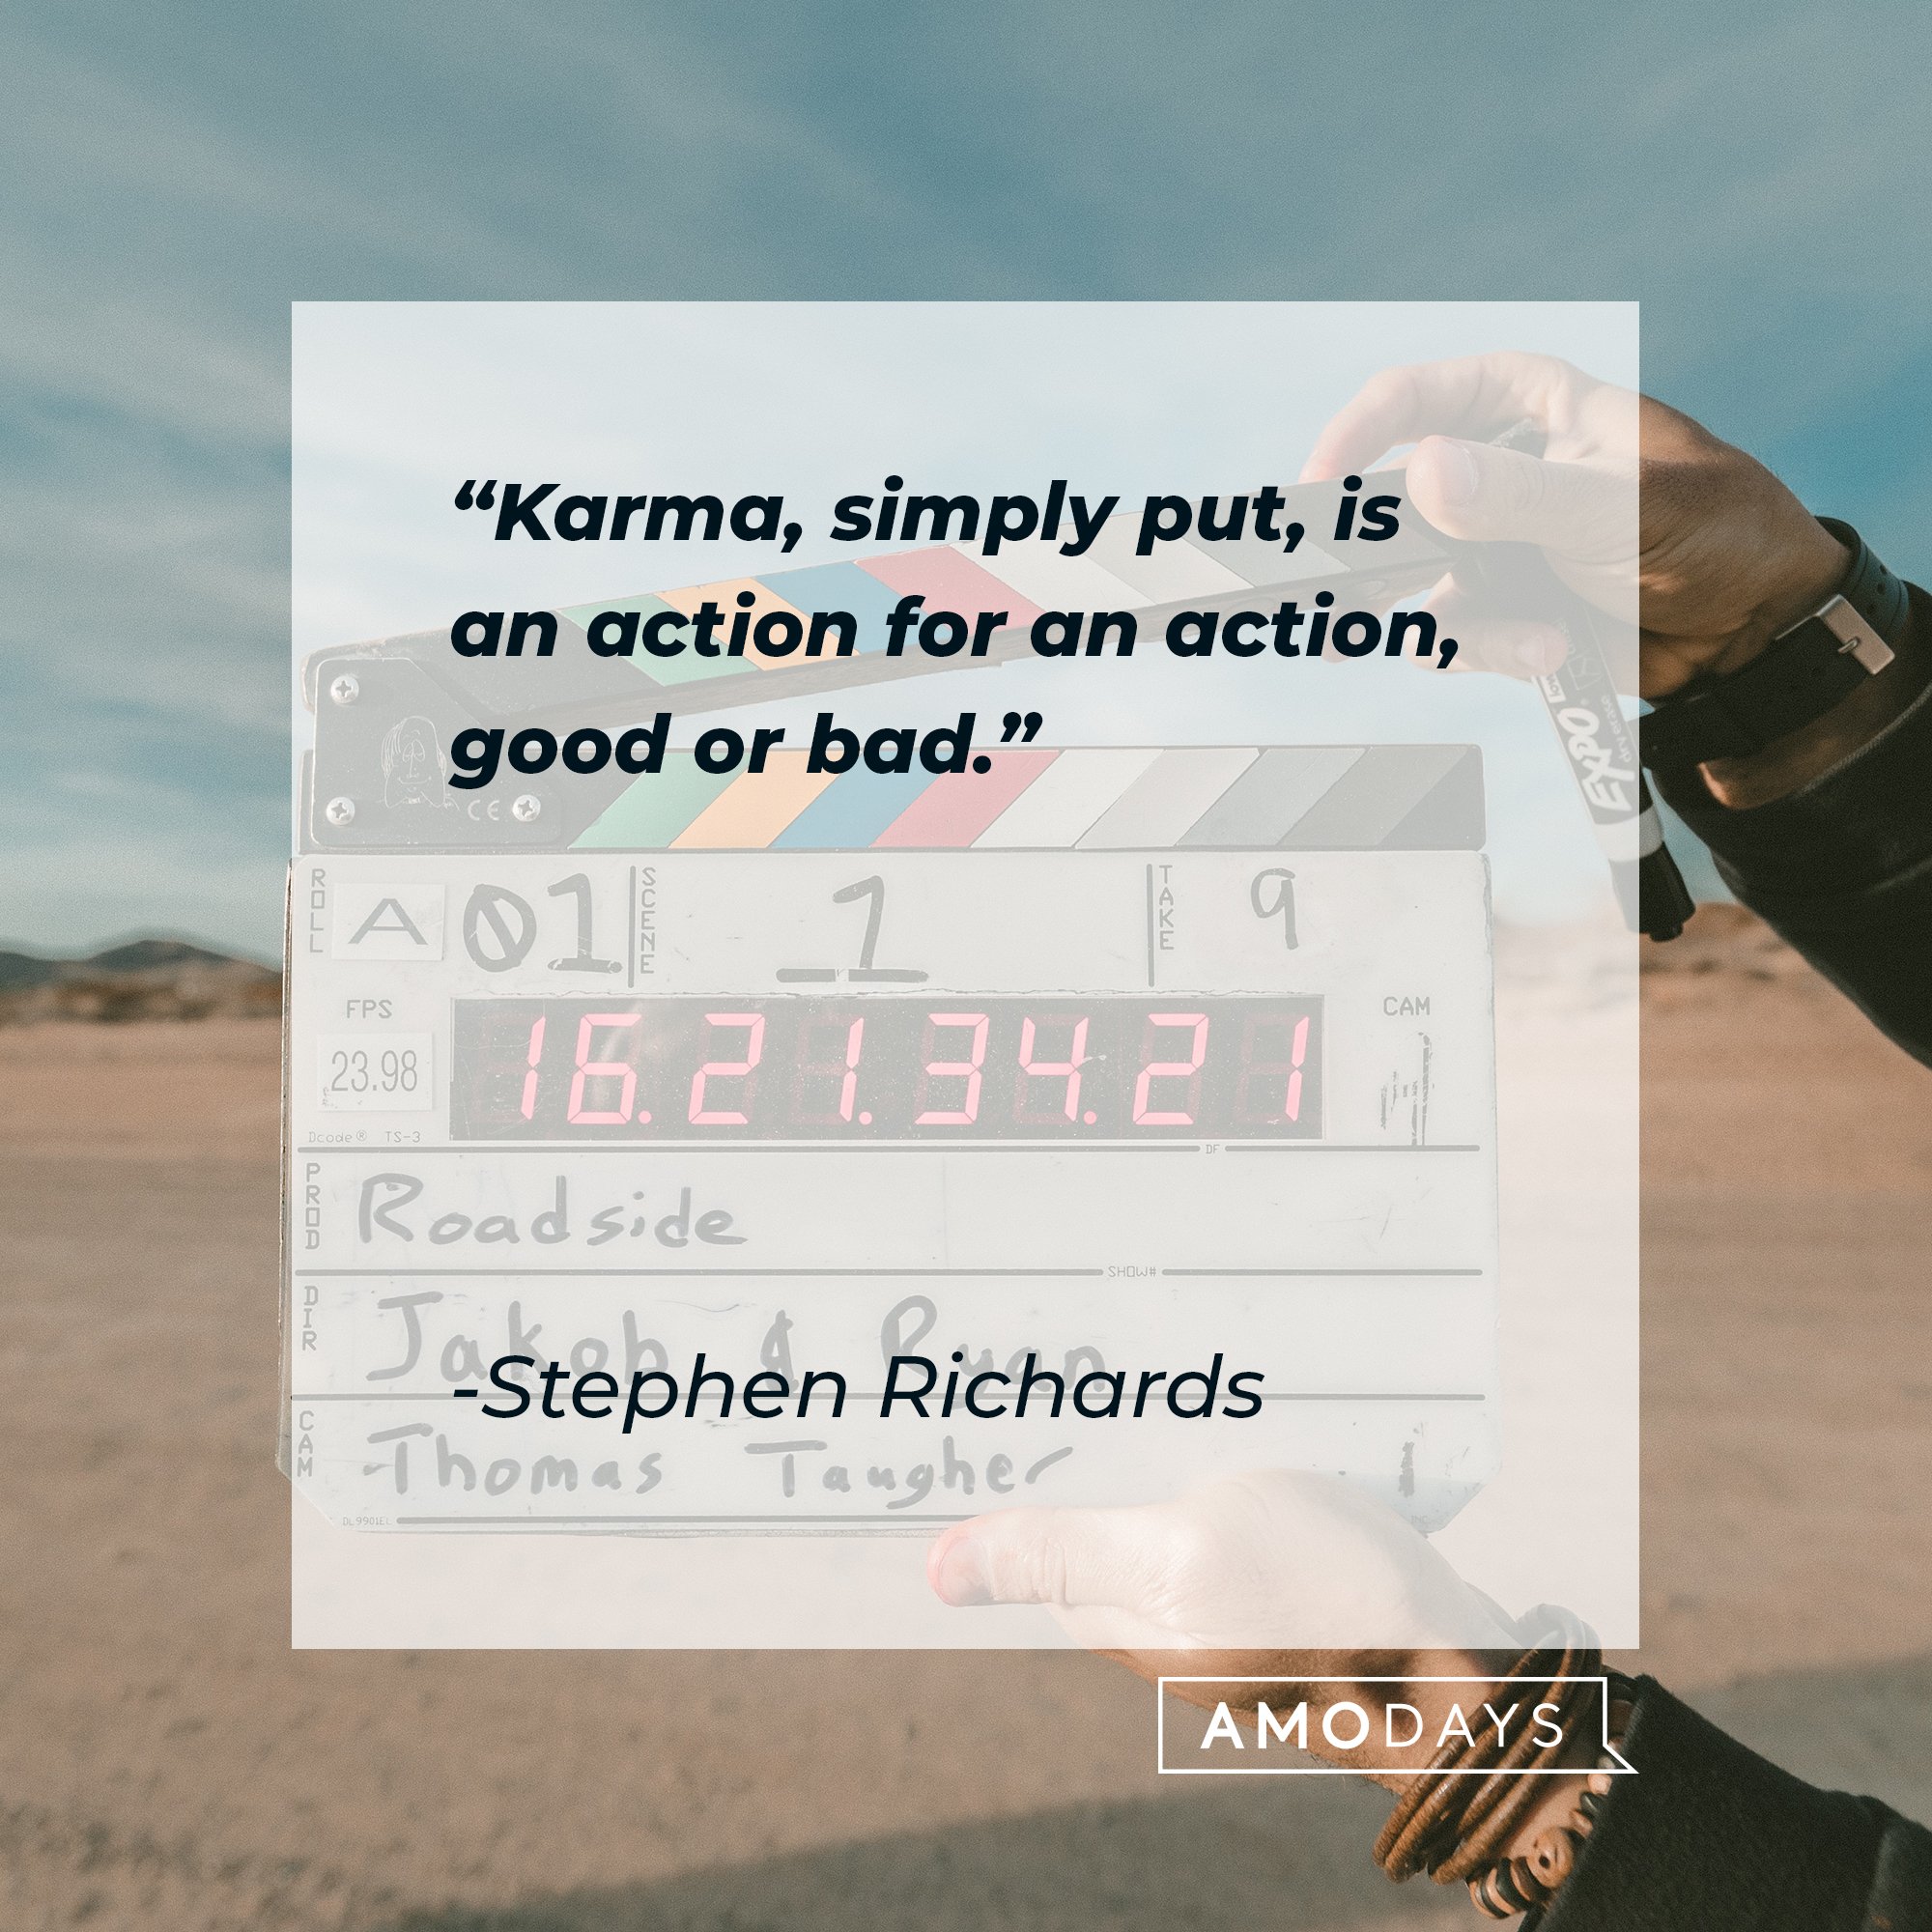 Stephen Richards' quote: “Karma, simply put, is an action for an action, good or bad.” | Image: AmoDays